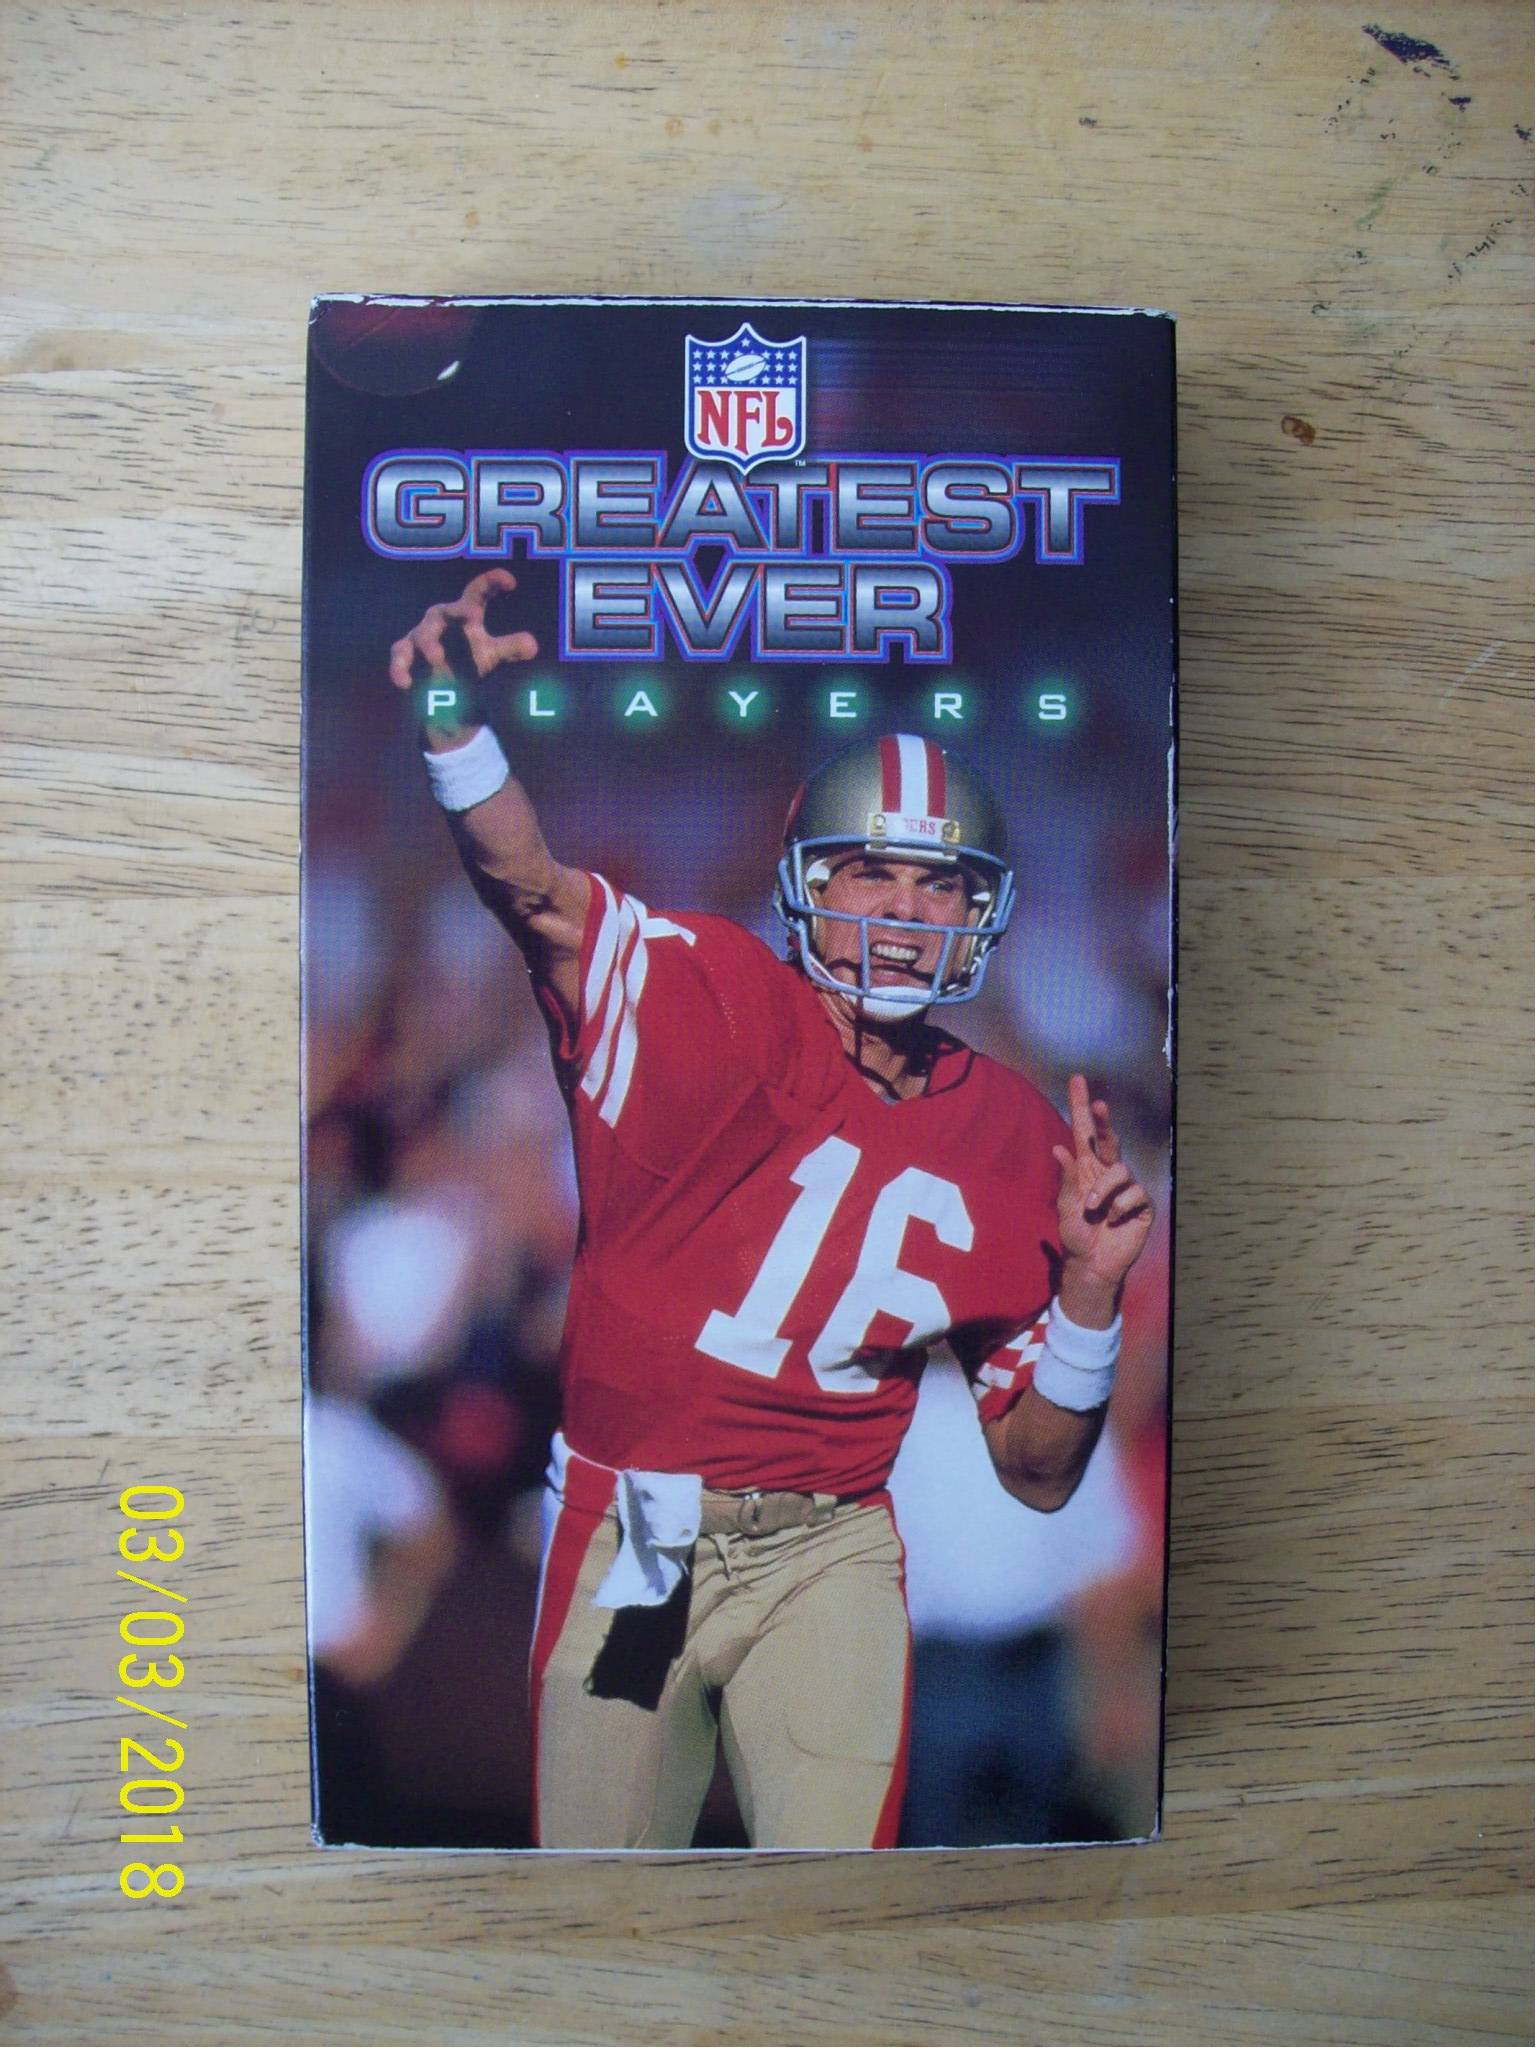 Greatest Ever NFL's Series Box Set Volumes 1-3 VHS